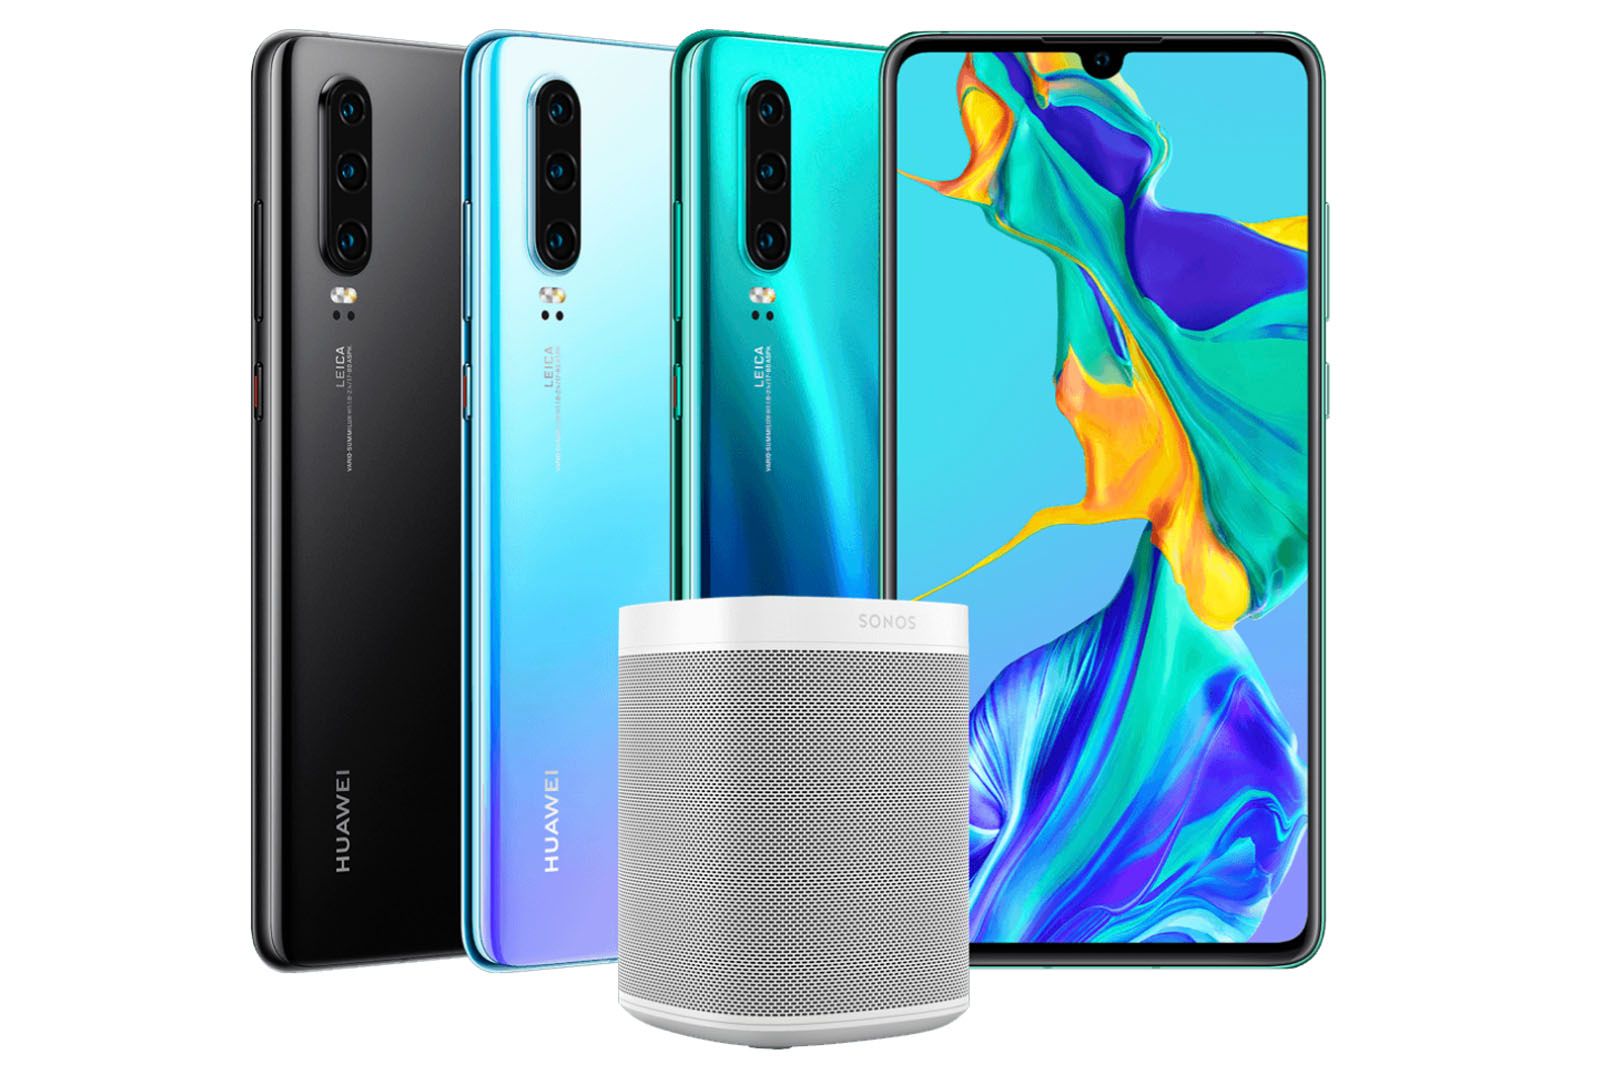 Huawei P30 pre-order deals will include a Sonos One image 1